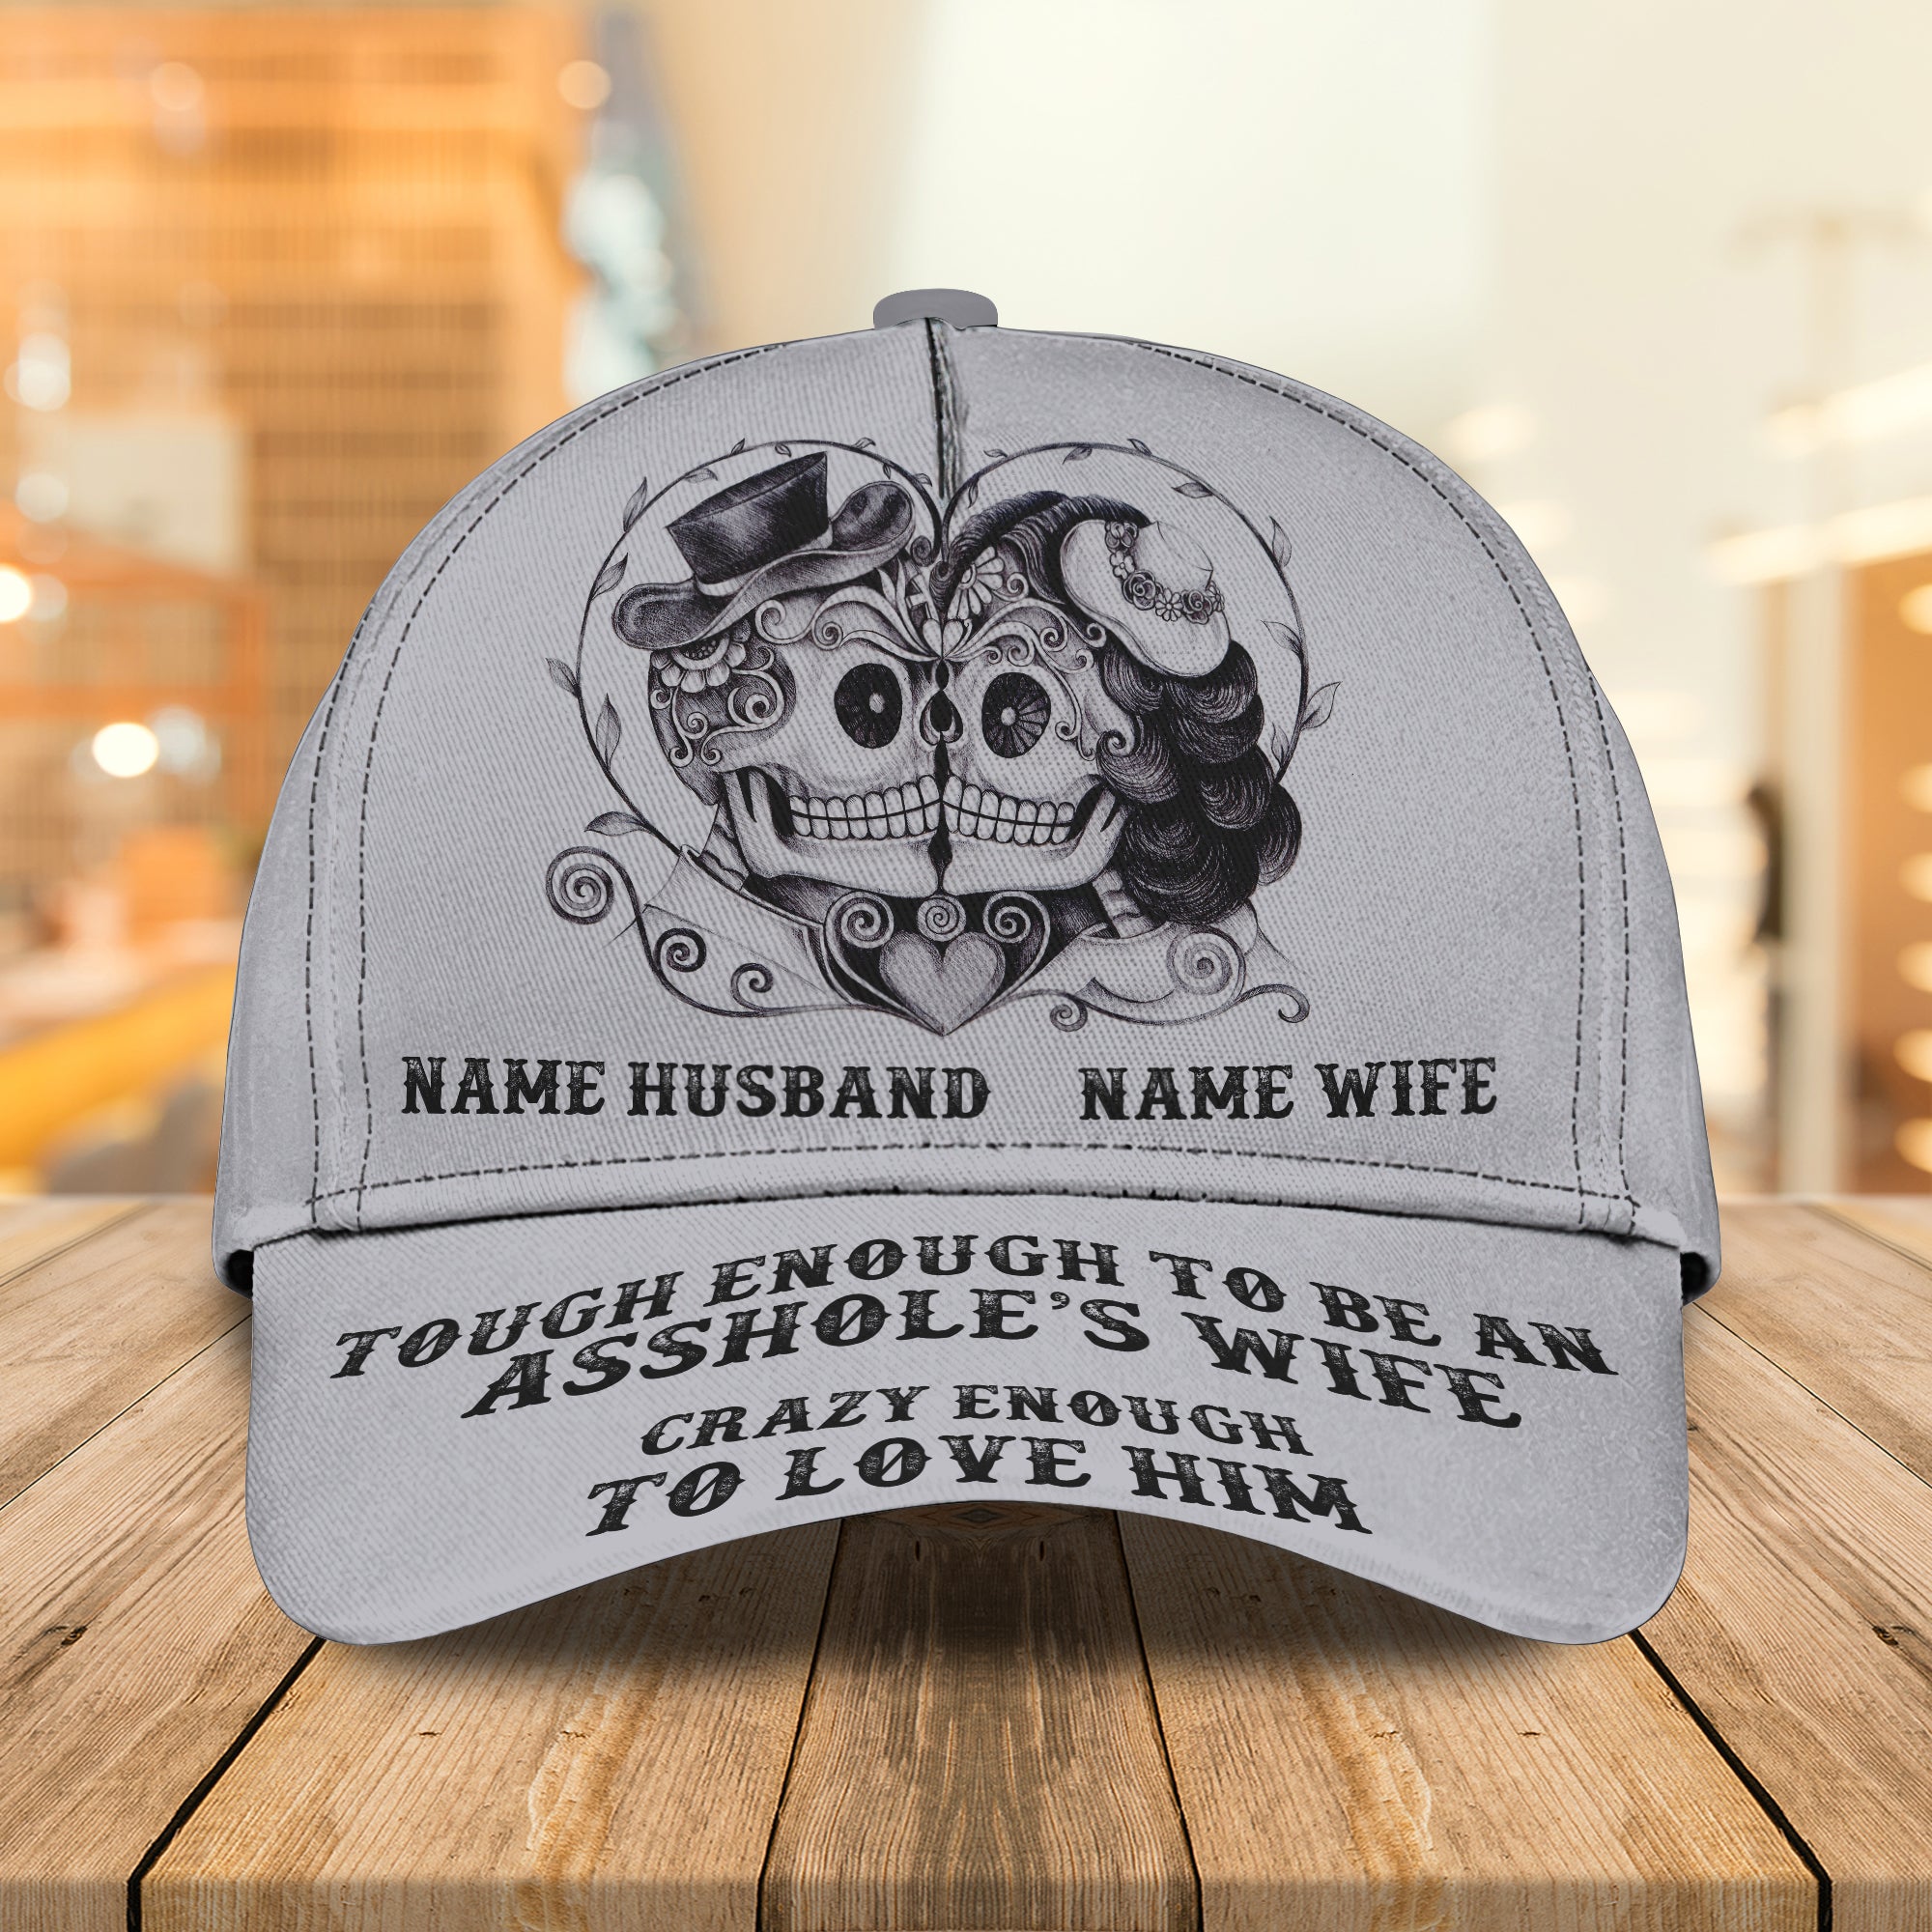 To Love Him - Personalized Name Cap - PTT